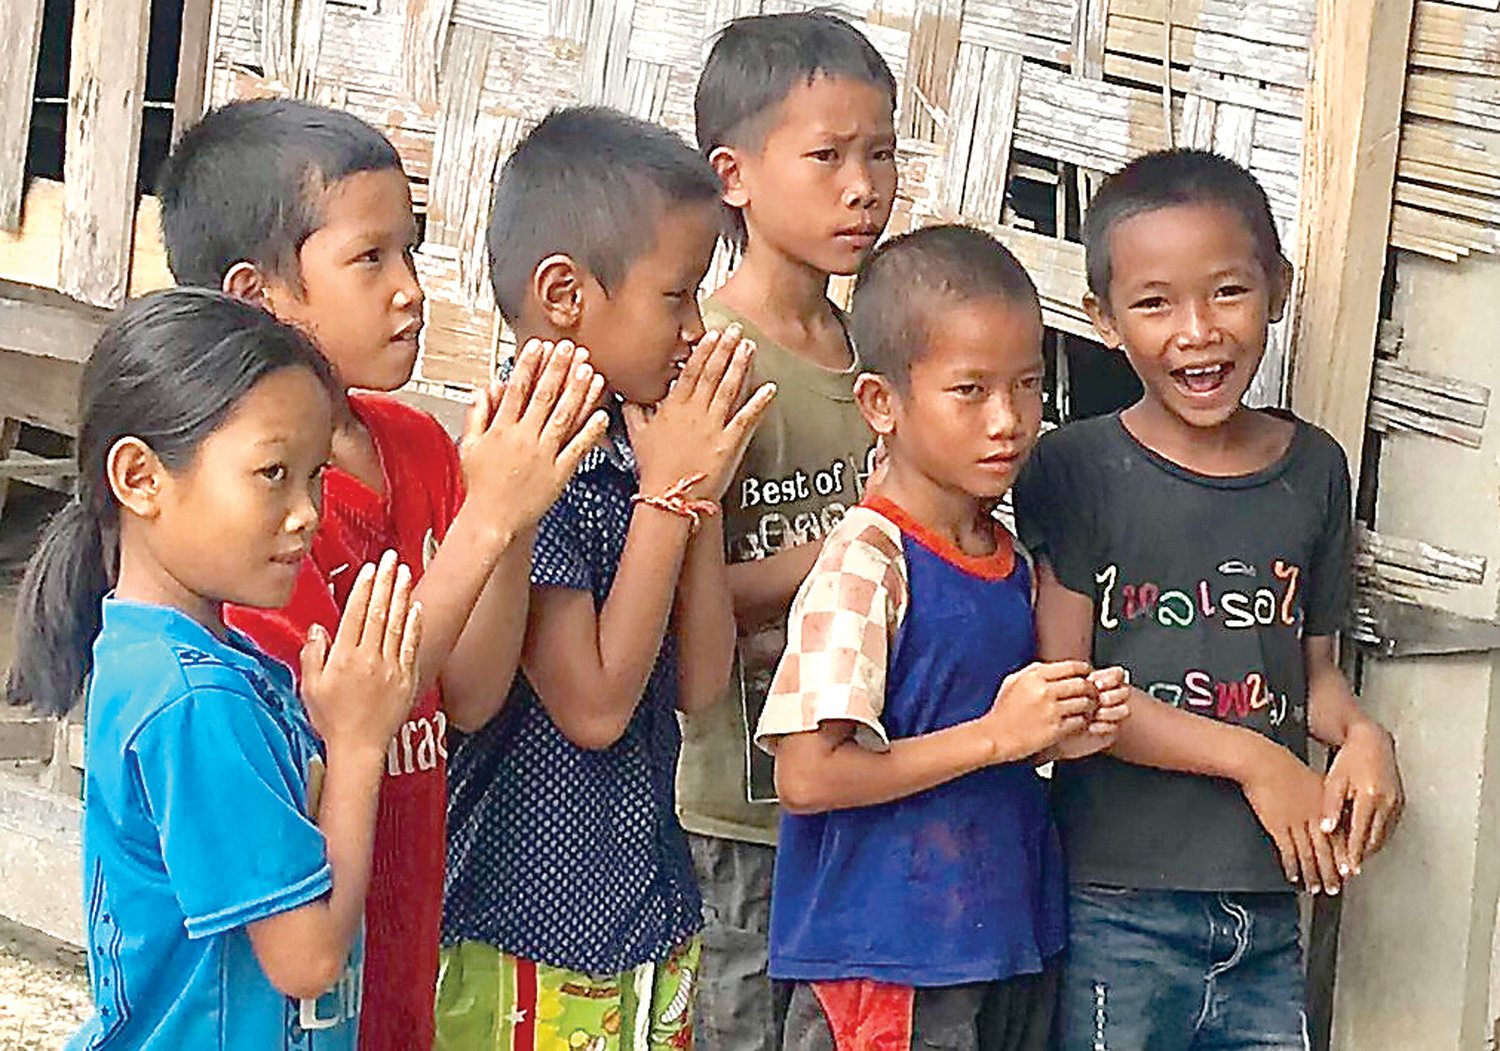 Laos students are eager to have a new school in their village. Members of Stockton Presbyterian Church are working to raise $35,000 for the project. A fundraiser is set for July 13.